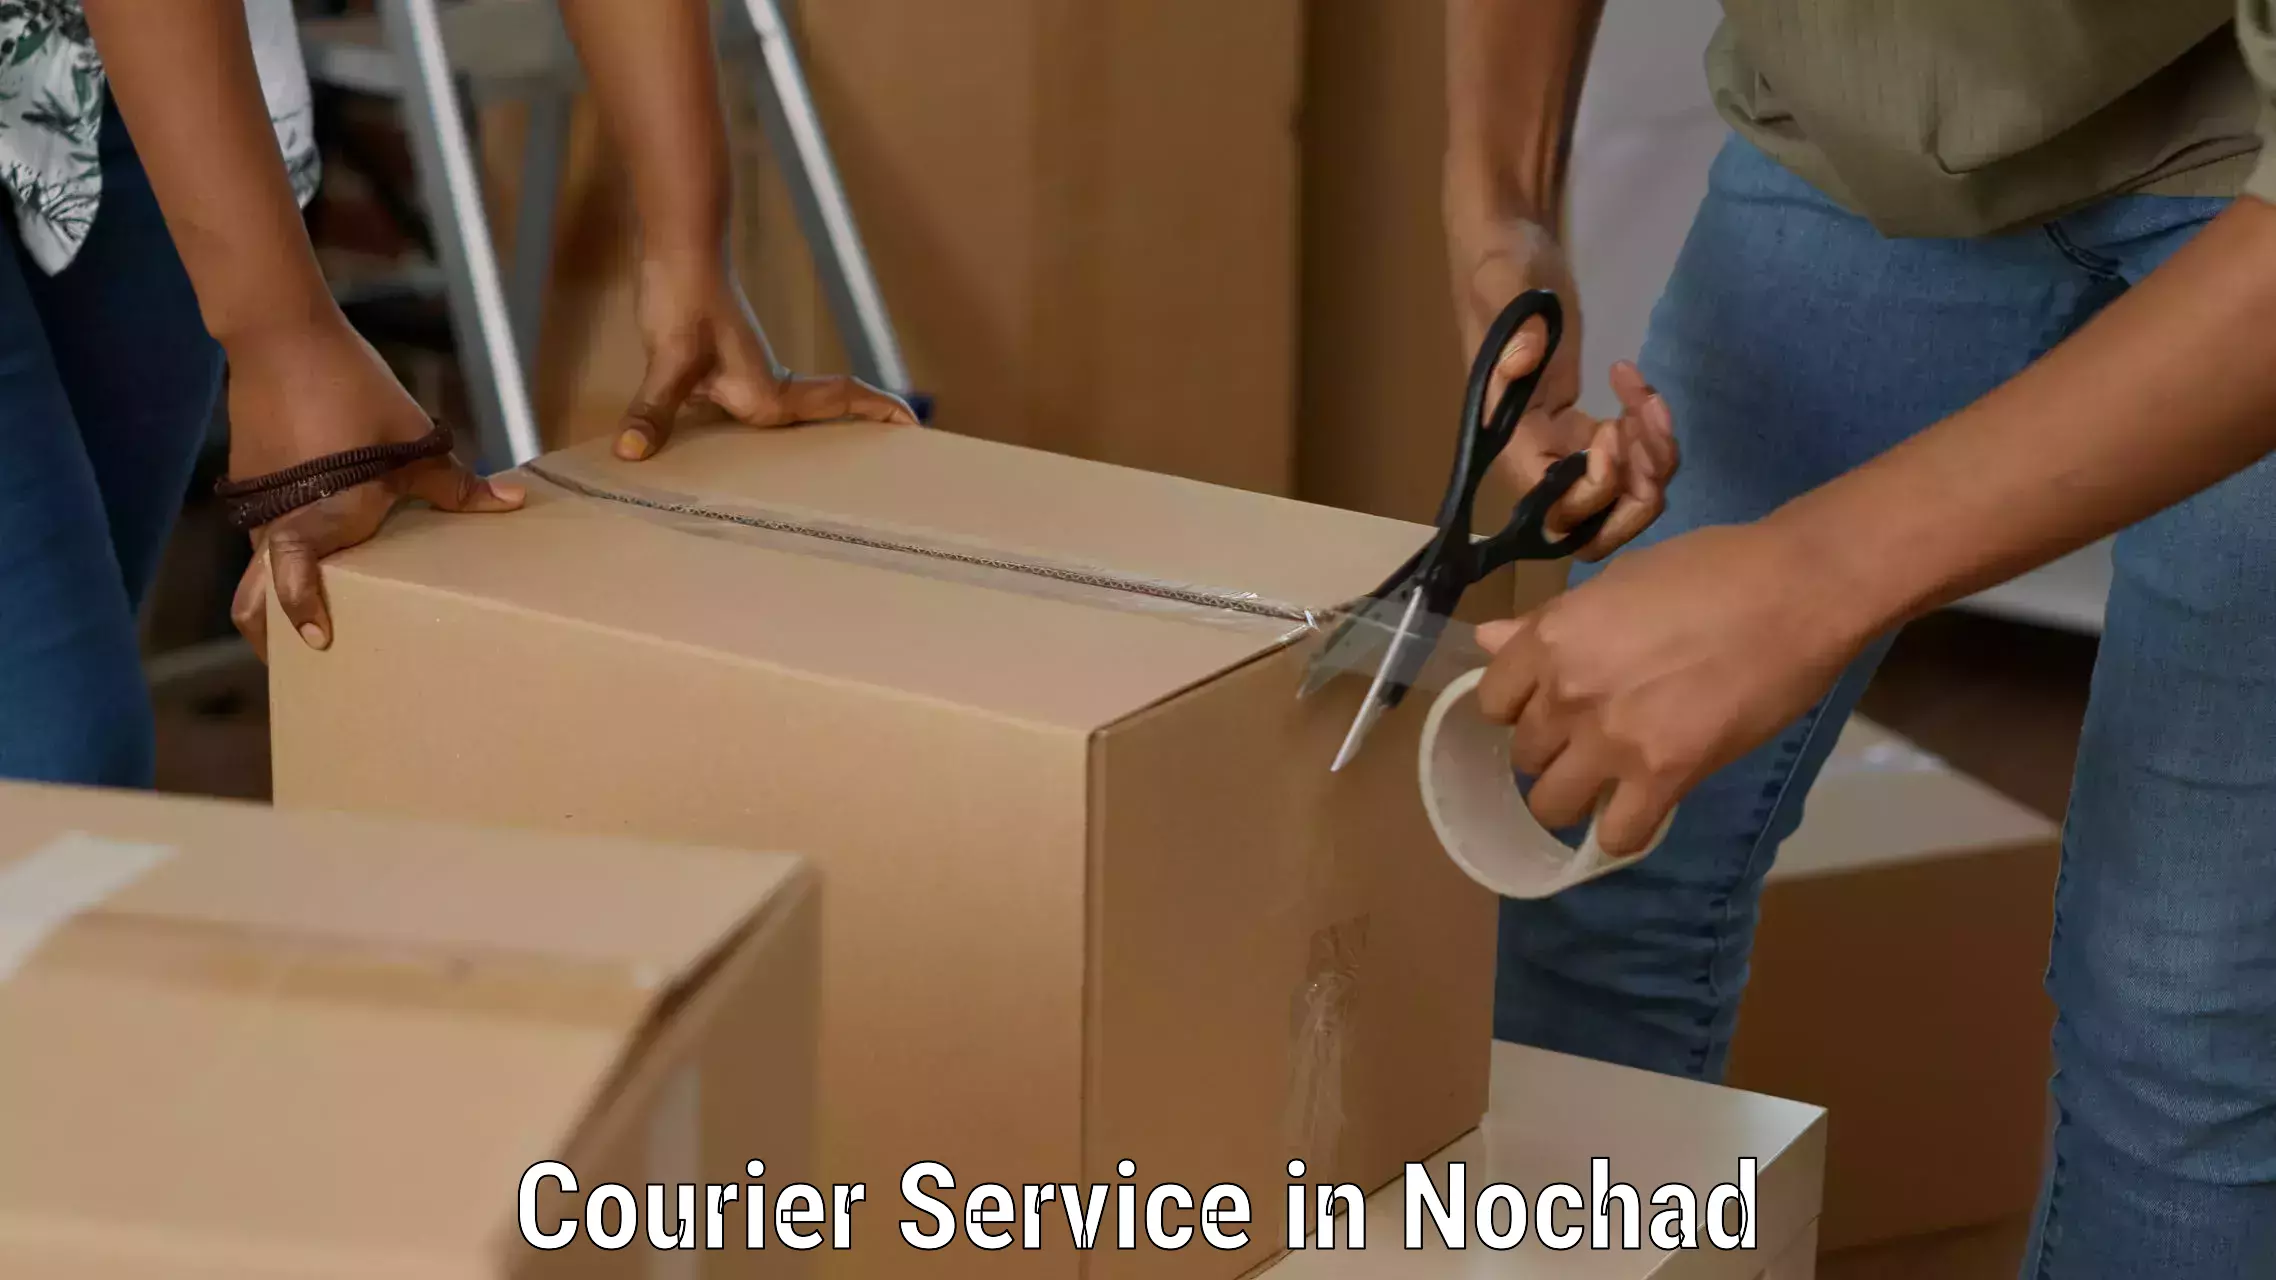 Courier service booking in Nochad